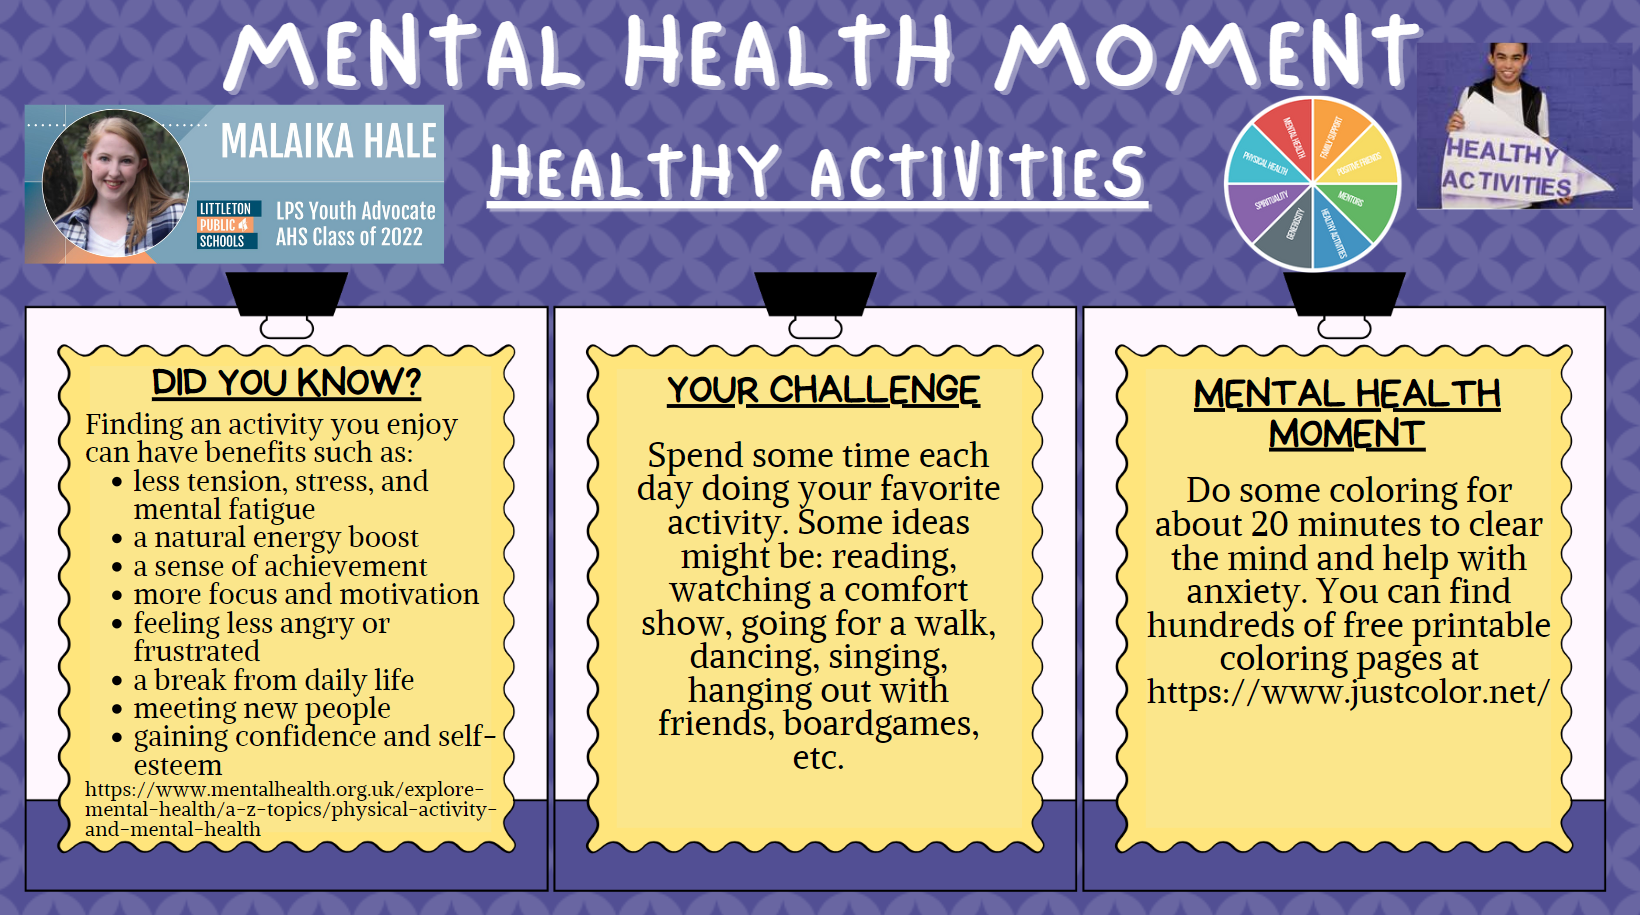  Mental Health Moment: HEALTHY ACTIVITIES Malaika Hale, LPS Youth Advocate, AHS Class of 2022    Did you know? Finding an activity you enjoy can have benefits such as:    less tension, stress , and mental fatigue a natural energy boost a sense of achievement more focus and motivation feeling less angry or frustrated a break from daily life meeting new people gaining confidence and self-esteem   https://tinyurl.com/mhm10healthyactivities    Your Challenge  Spend some time each day doing your favorite activity. Some ideas might be: reading, watching a comfort show, going for a walk, dancing singing, hanging out with friends, boardgames, etc.     Mental Health Moment Do some coloring for about 20 minutes to clear the mind and help with anxiety. You can find hundreds of free printable  coloring pages at https://www.justcolor.net/. 